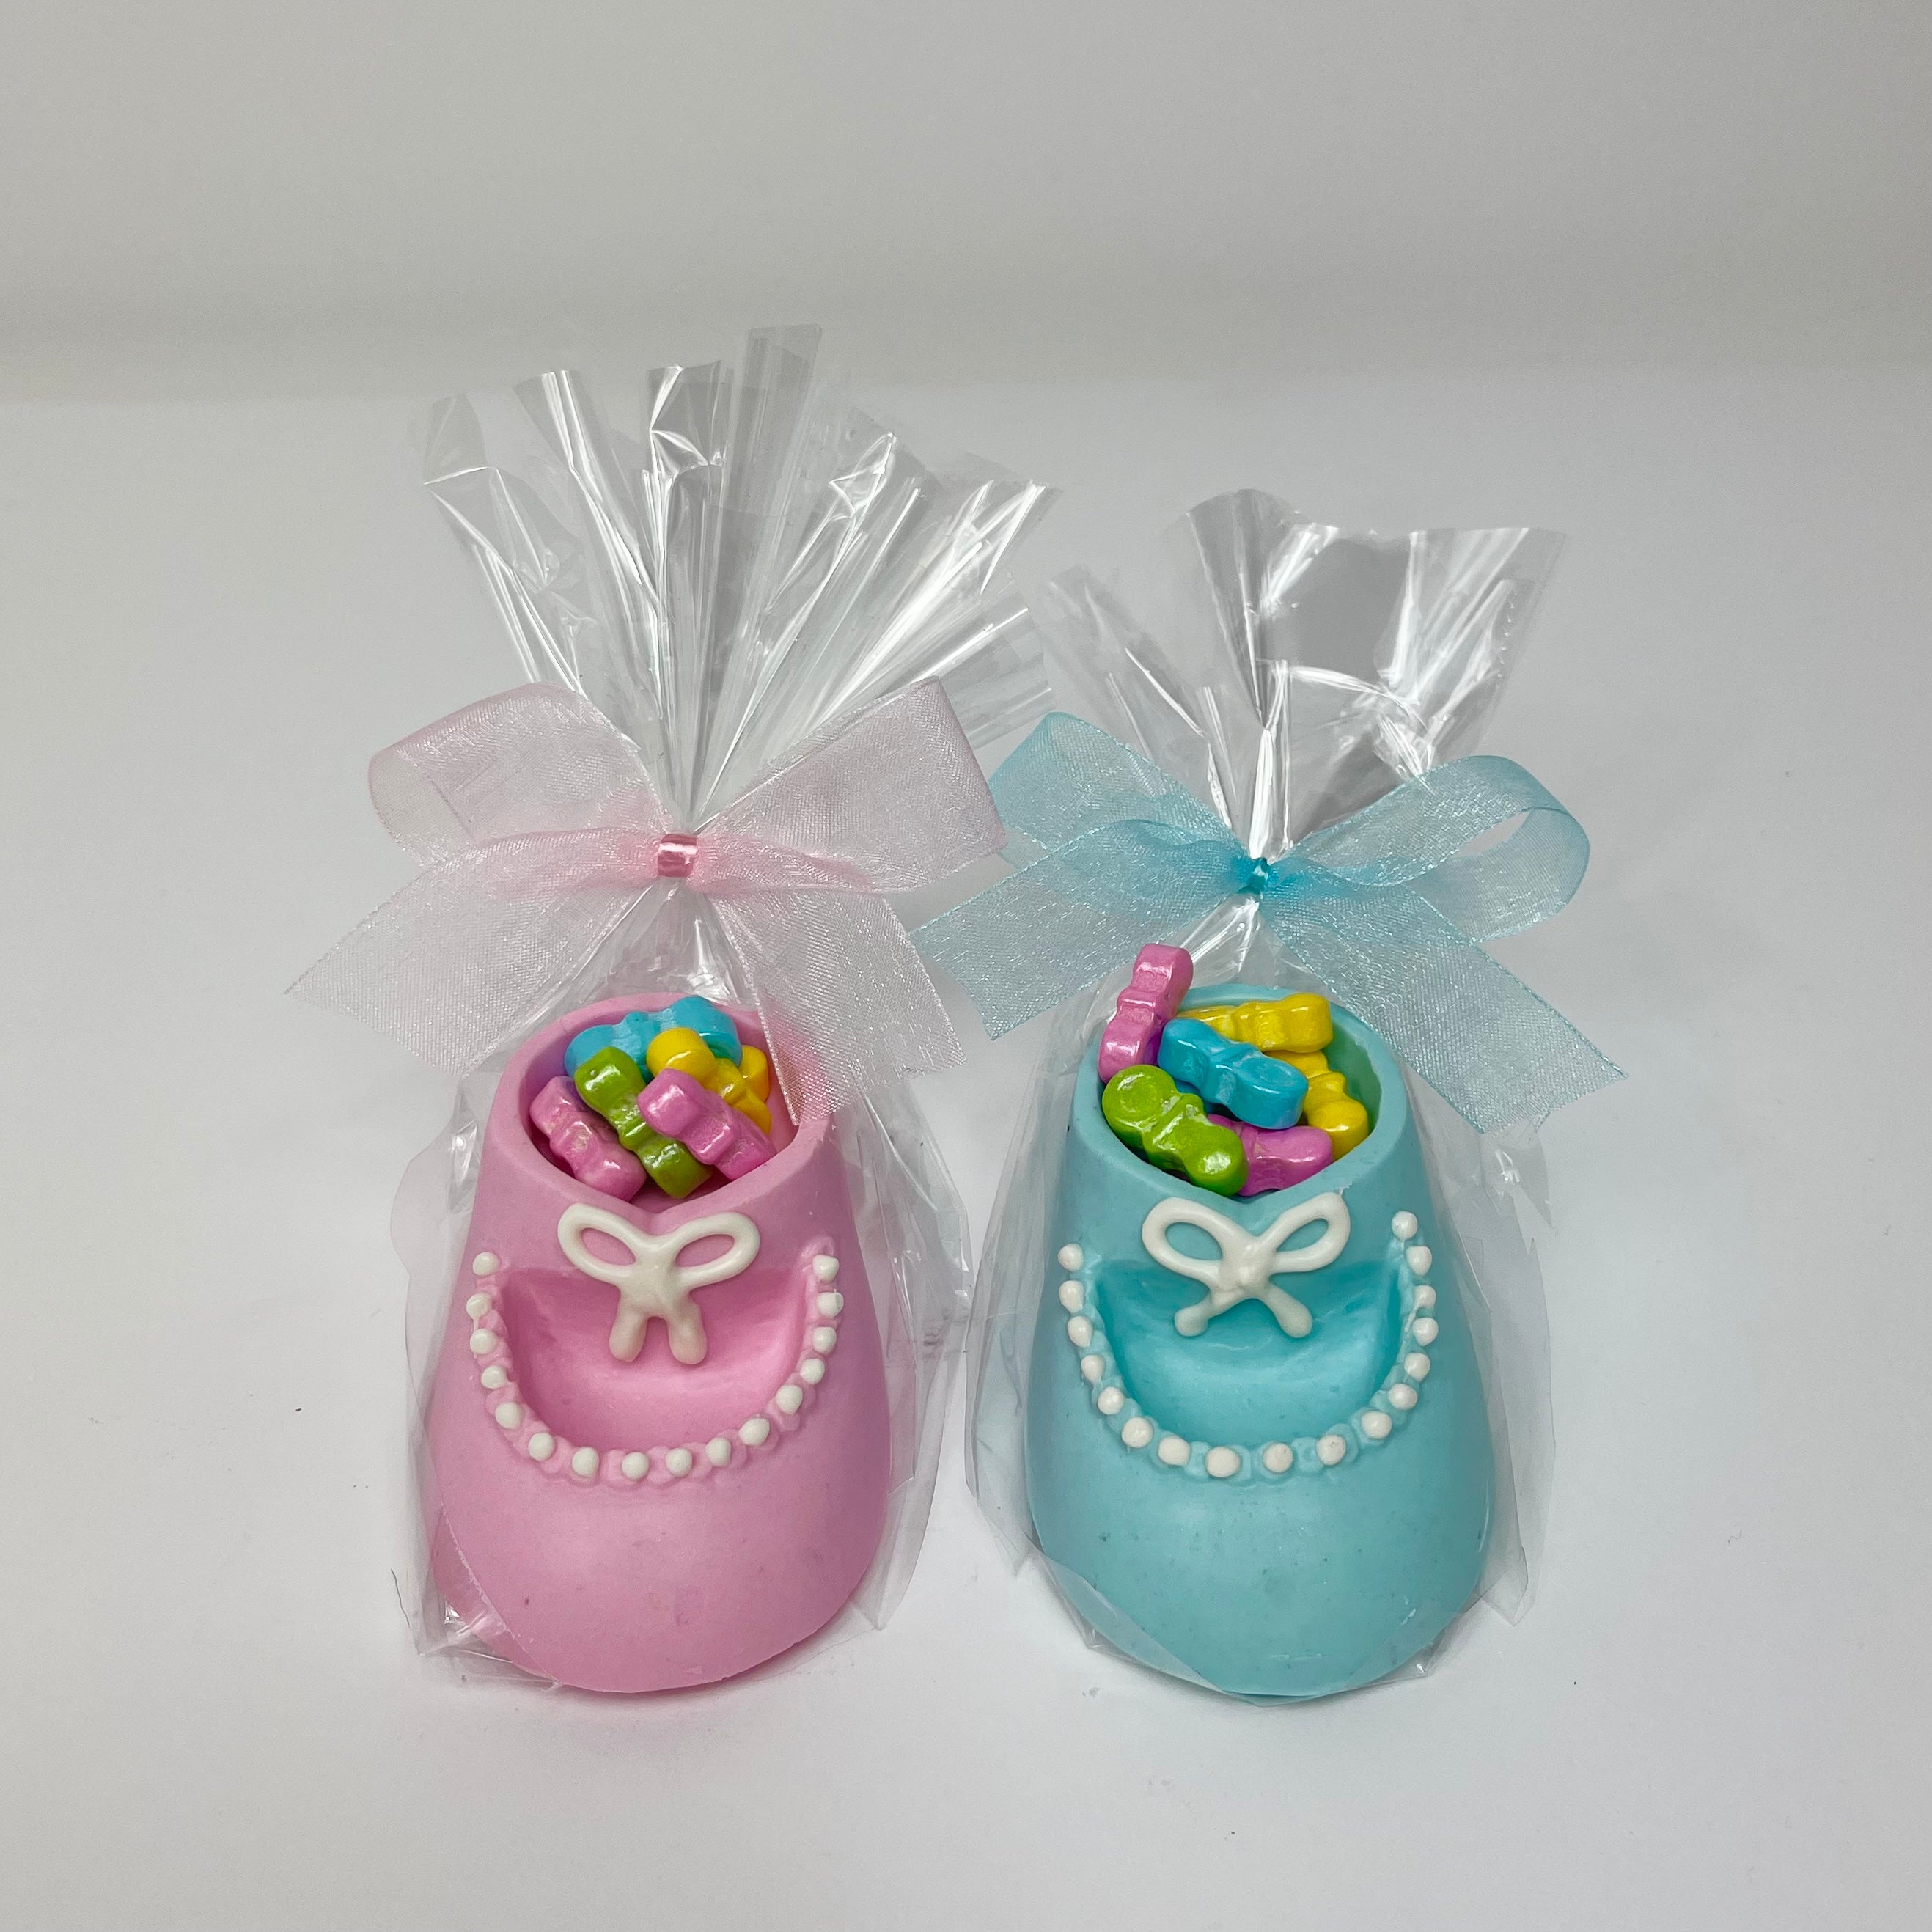 Blue and pink Chocolate Baby Booties warped in cellophane with ribbons